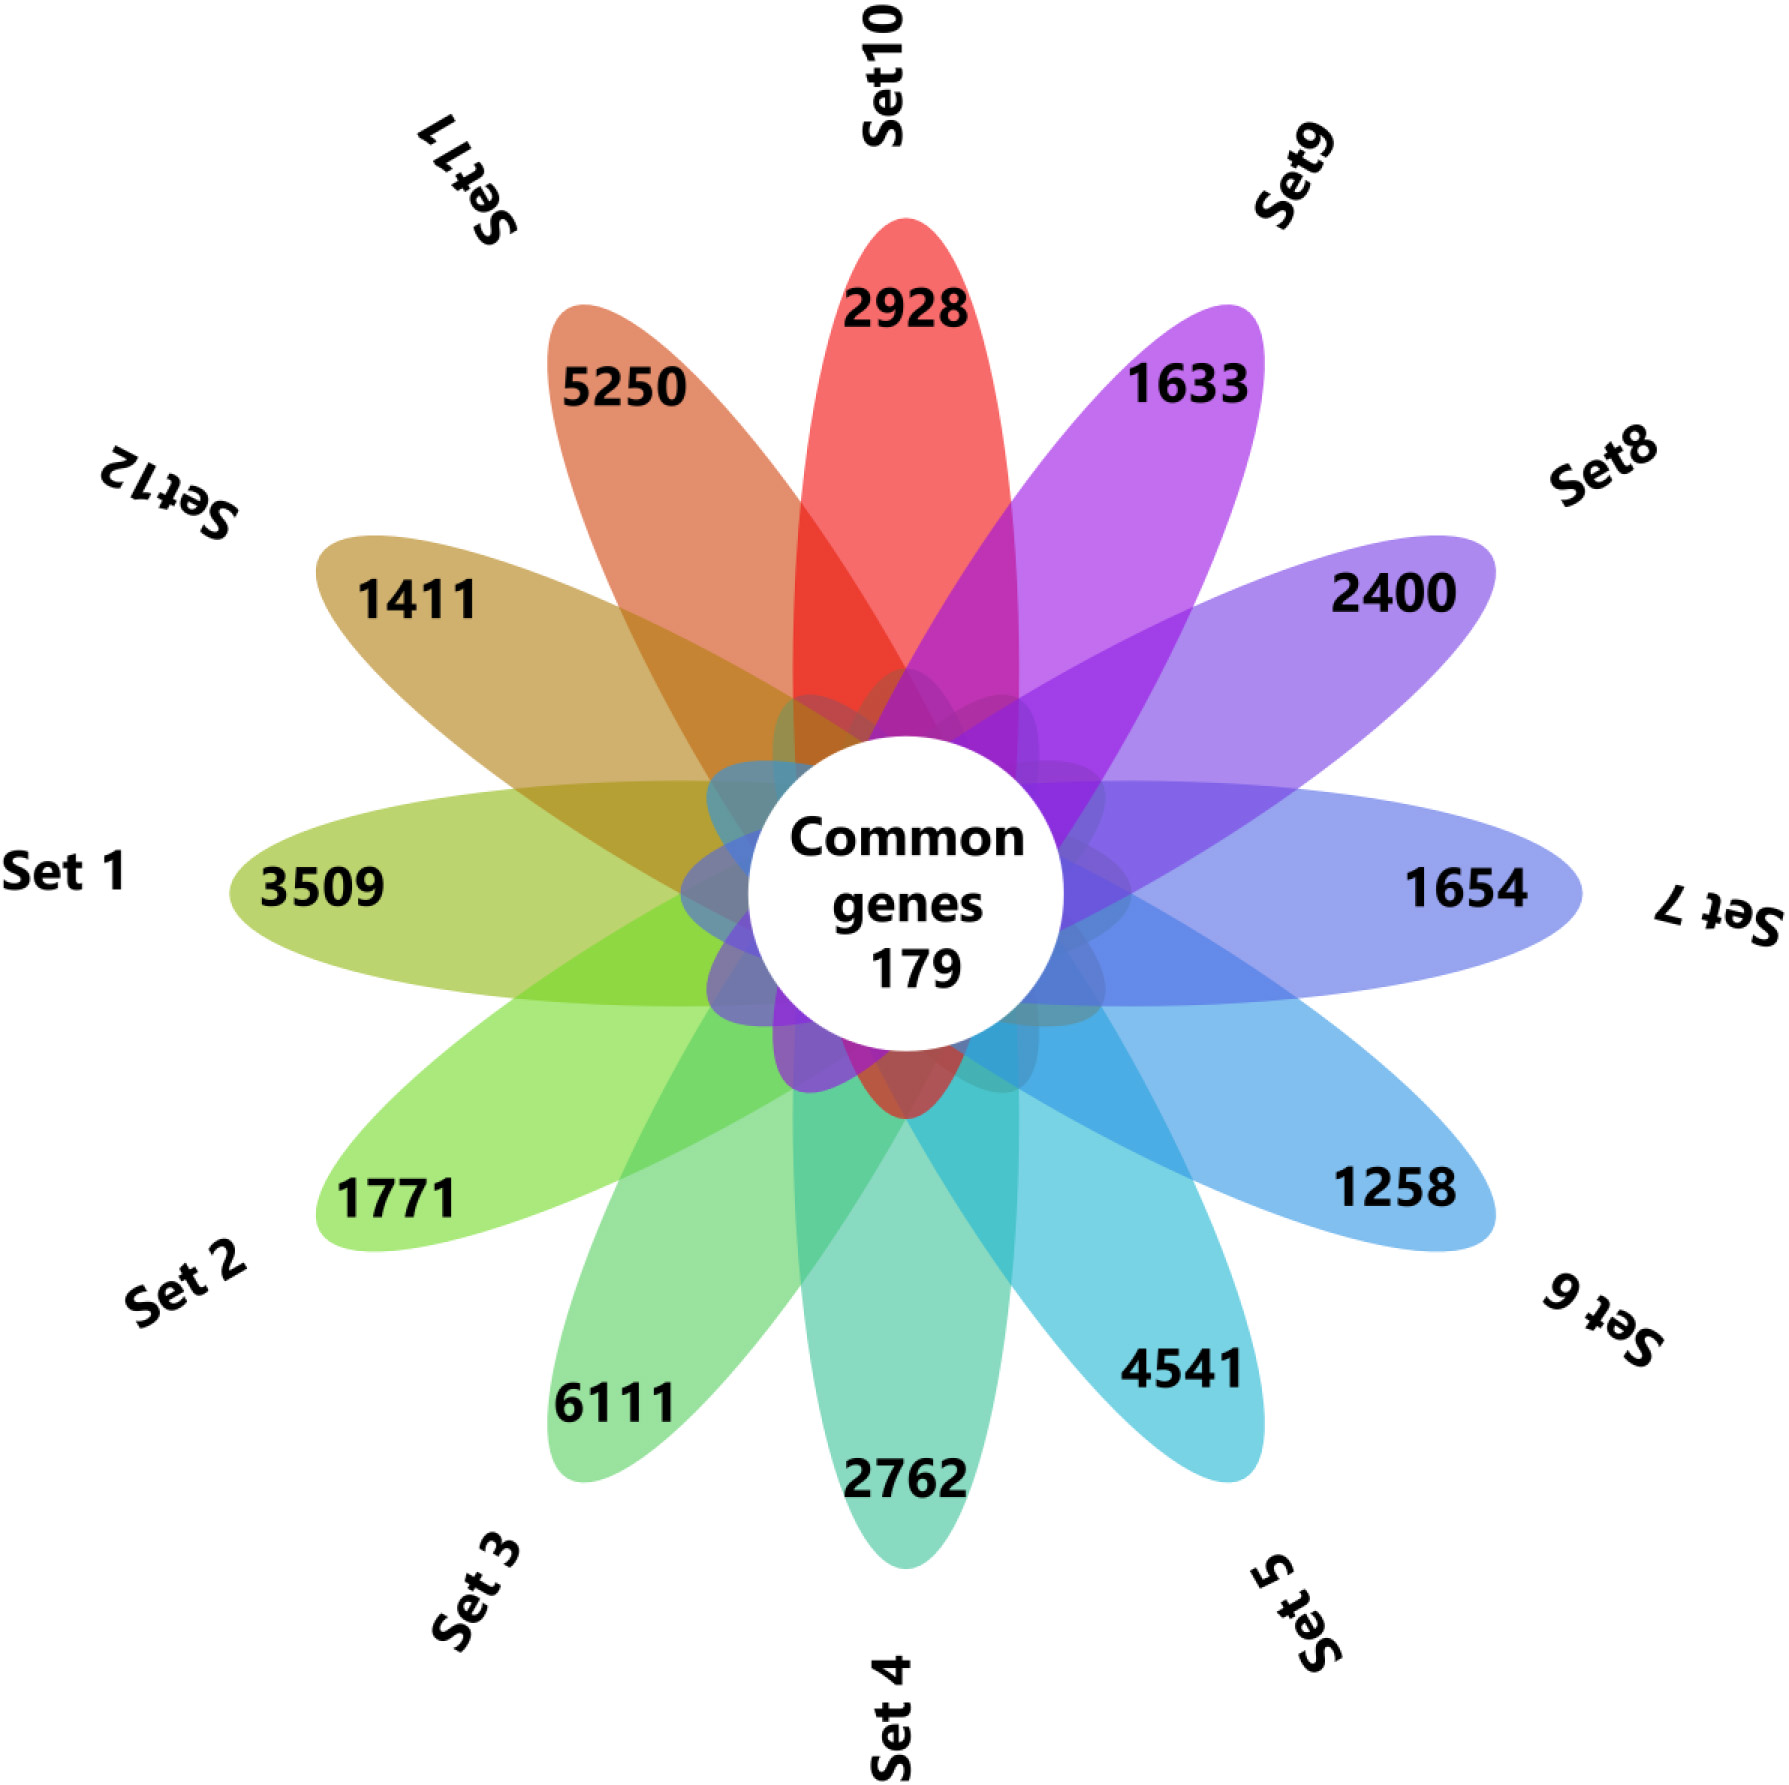 The common genes between the 12 datasets were identified by Venny 2.1 and represented in flower plot.